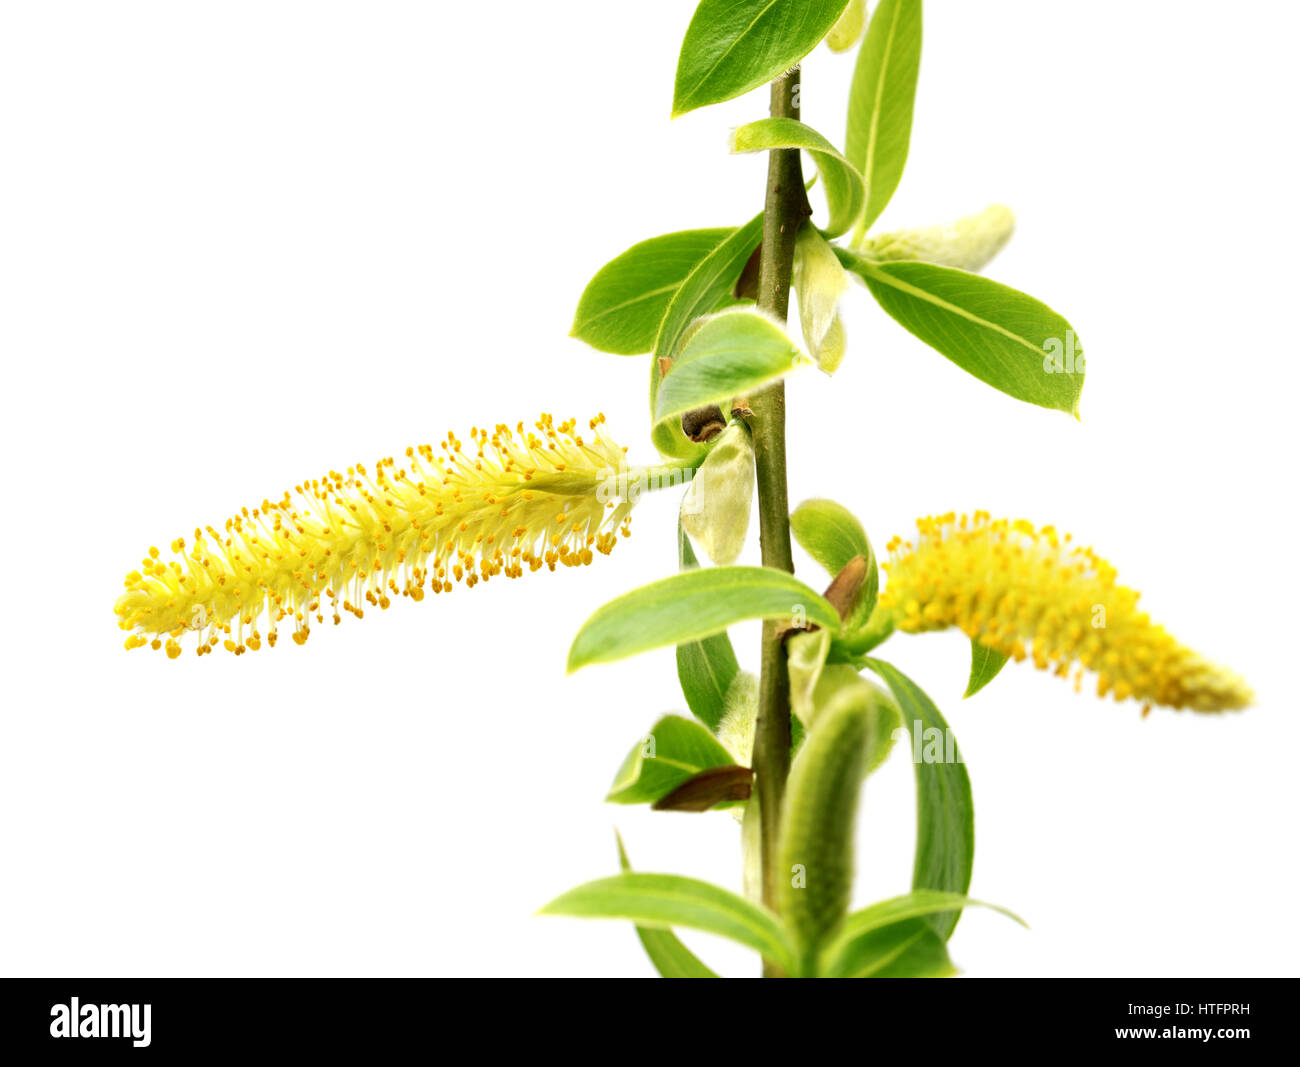 Spring twigs of willow with young green leaves and yellow catkins. Isolated on white background. Close-up view. Stock Photo